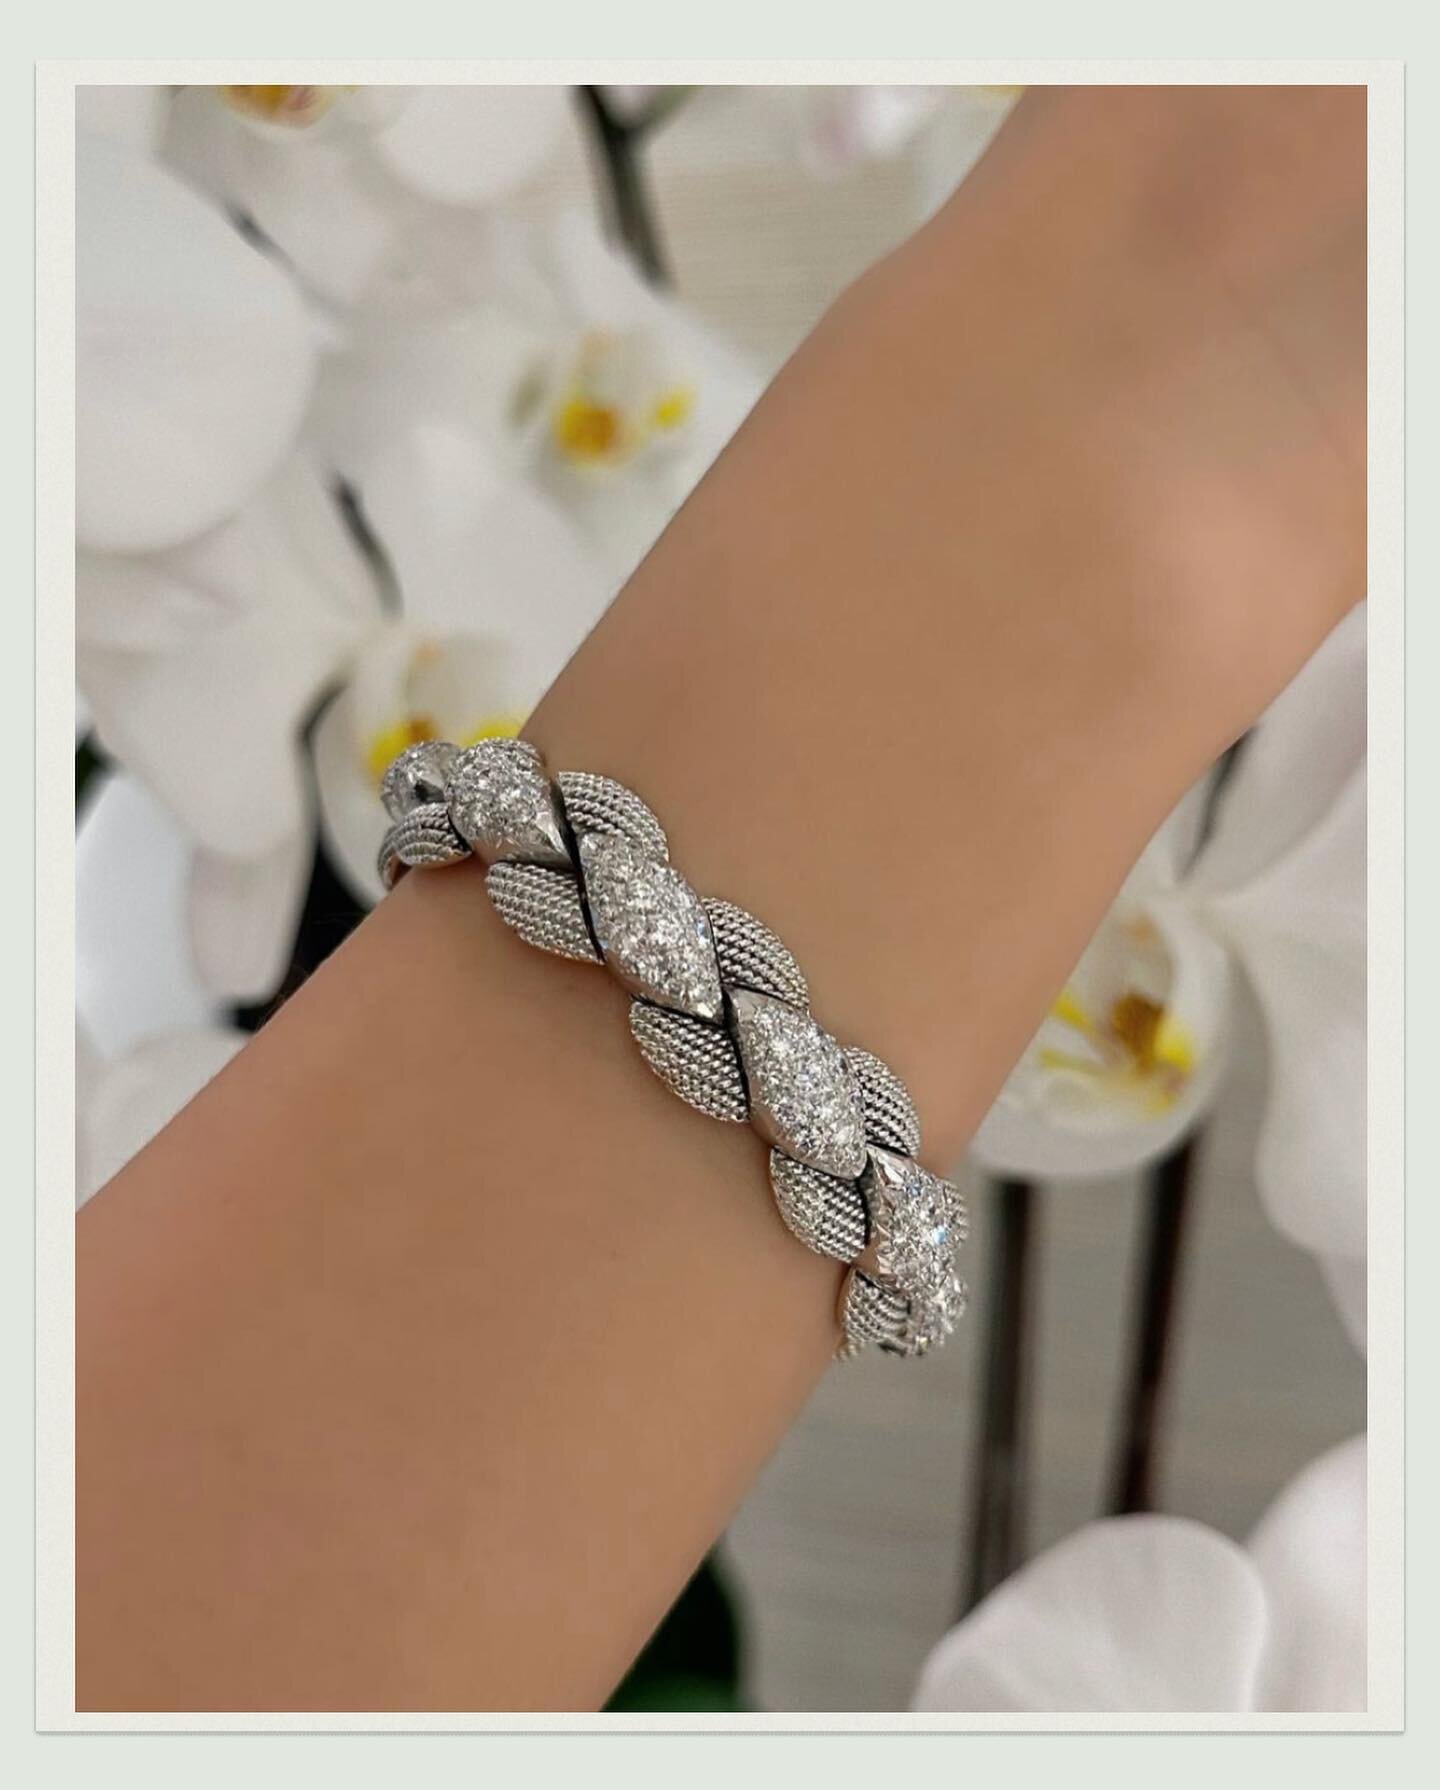 We would take this rare Sterl&eacute; platinum and diamond bracelet from the 60&rsquo;s over a diamond tennis bracelet anytime. Wouldn&rsquo;t you? Available for sale @revivaljewels 

#sterle #sterl&eacute; #sterleparis #frenchjewellery #platinumbrac